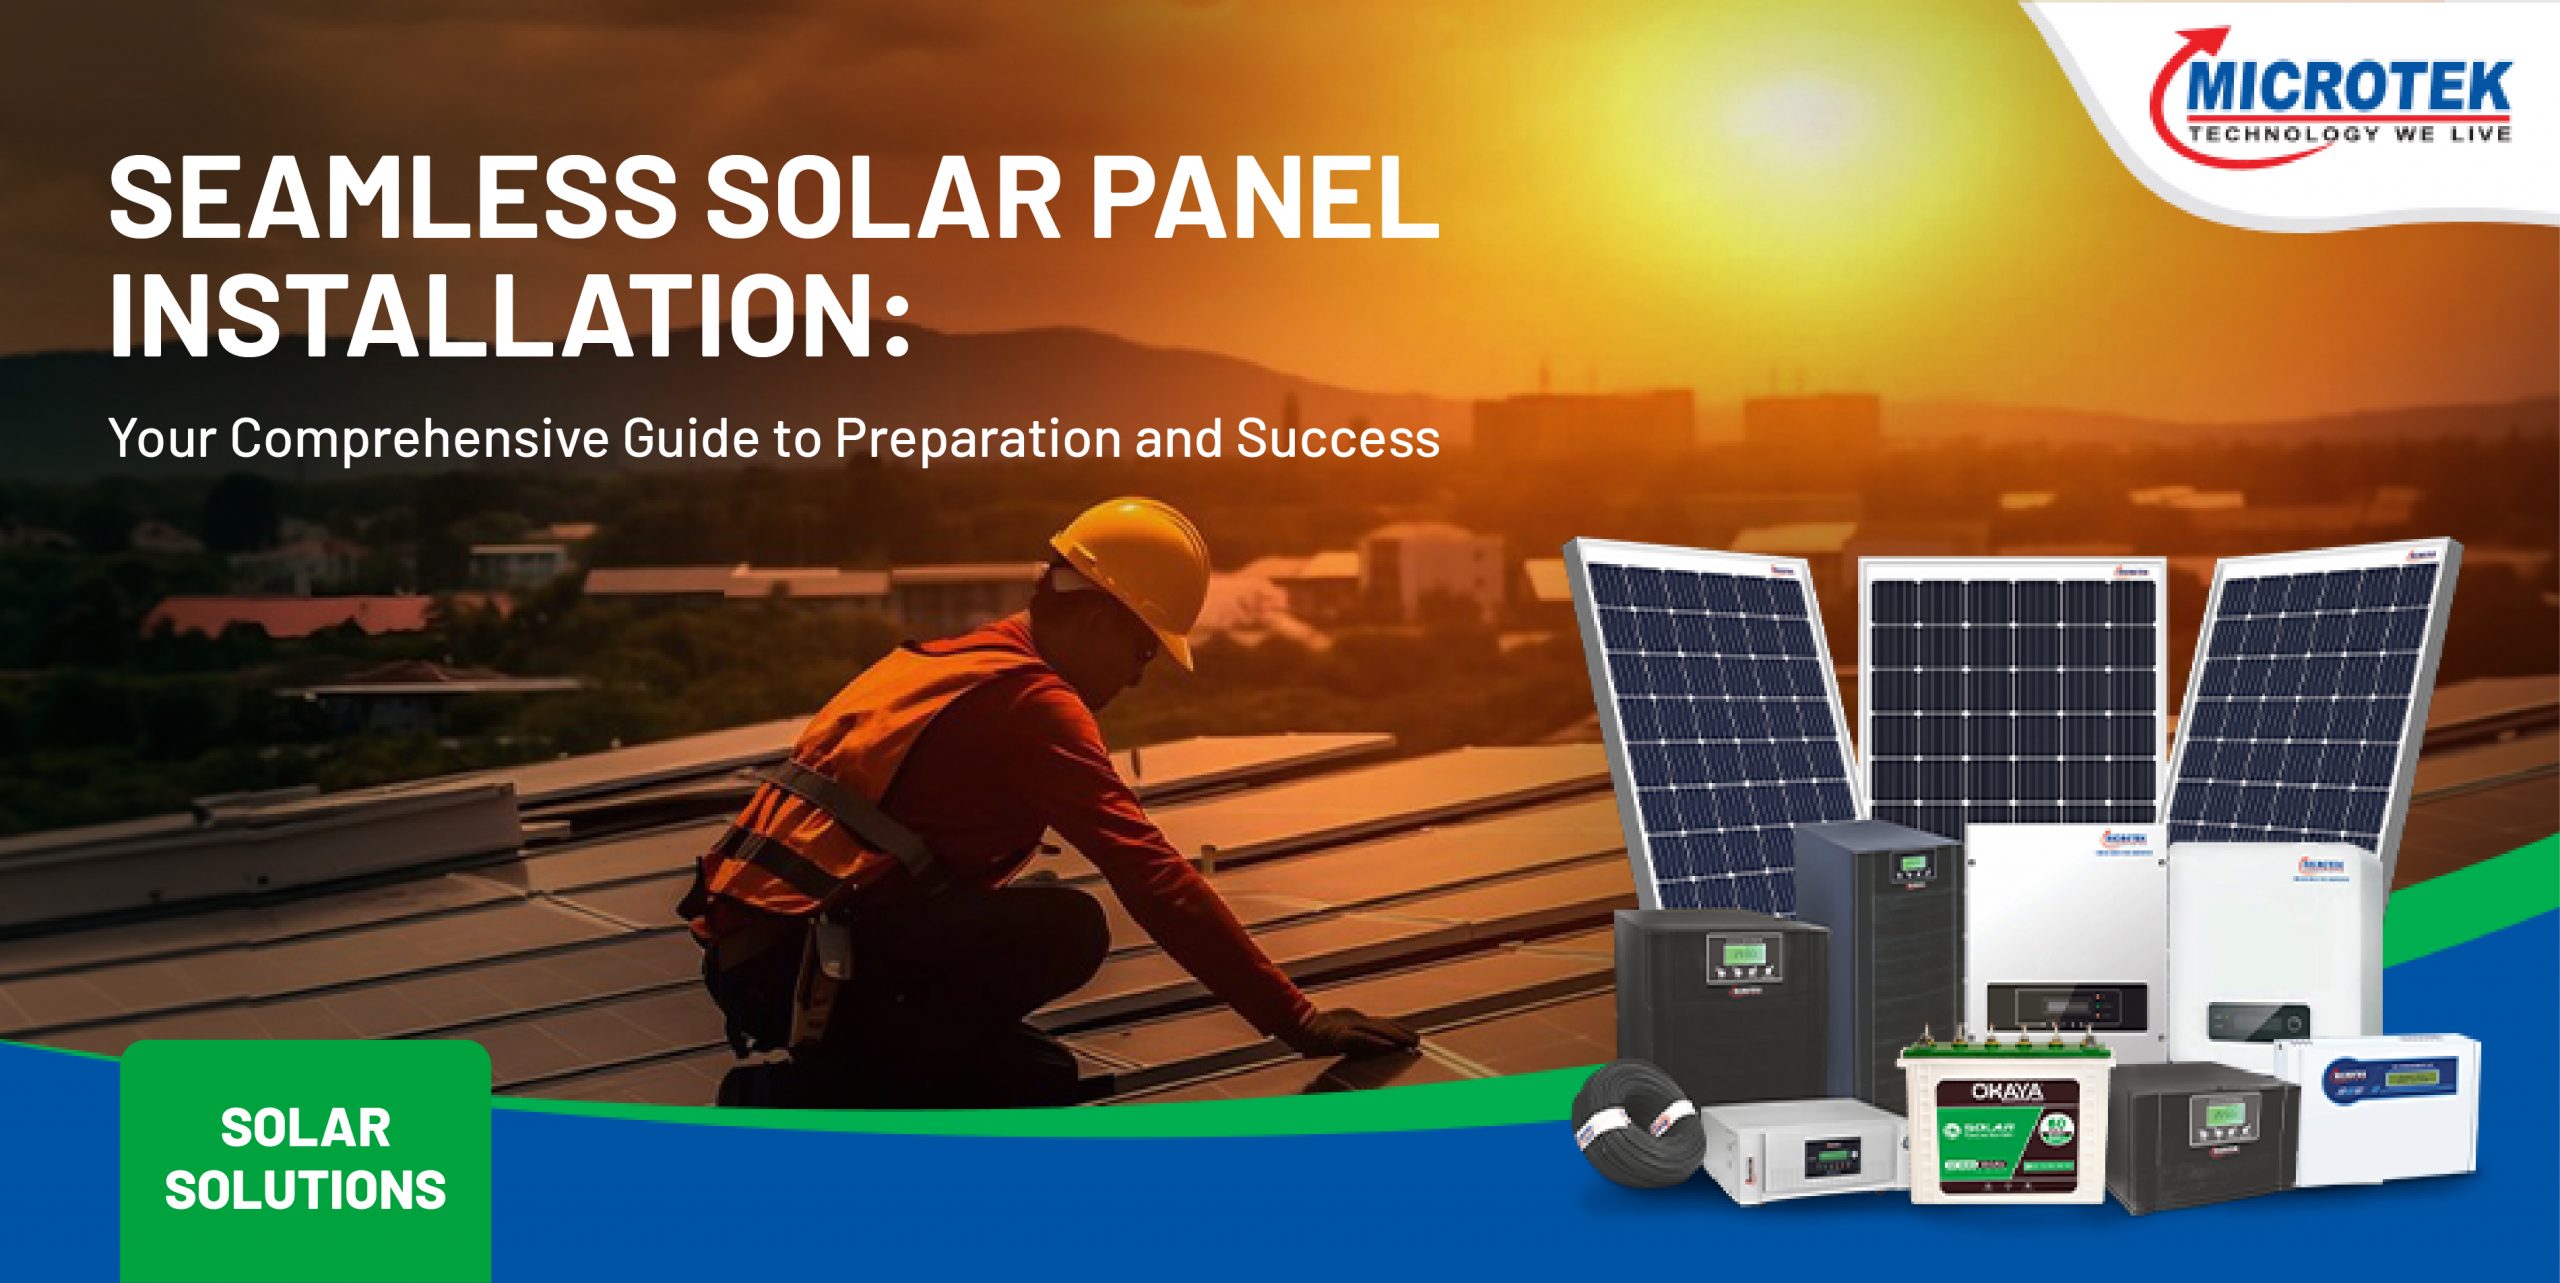 Seamless Solar Panel Installation: Your Comprehensive Guide to Preparation and Success